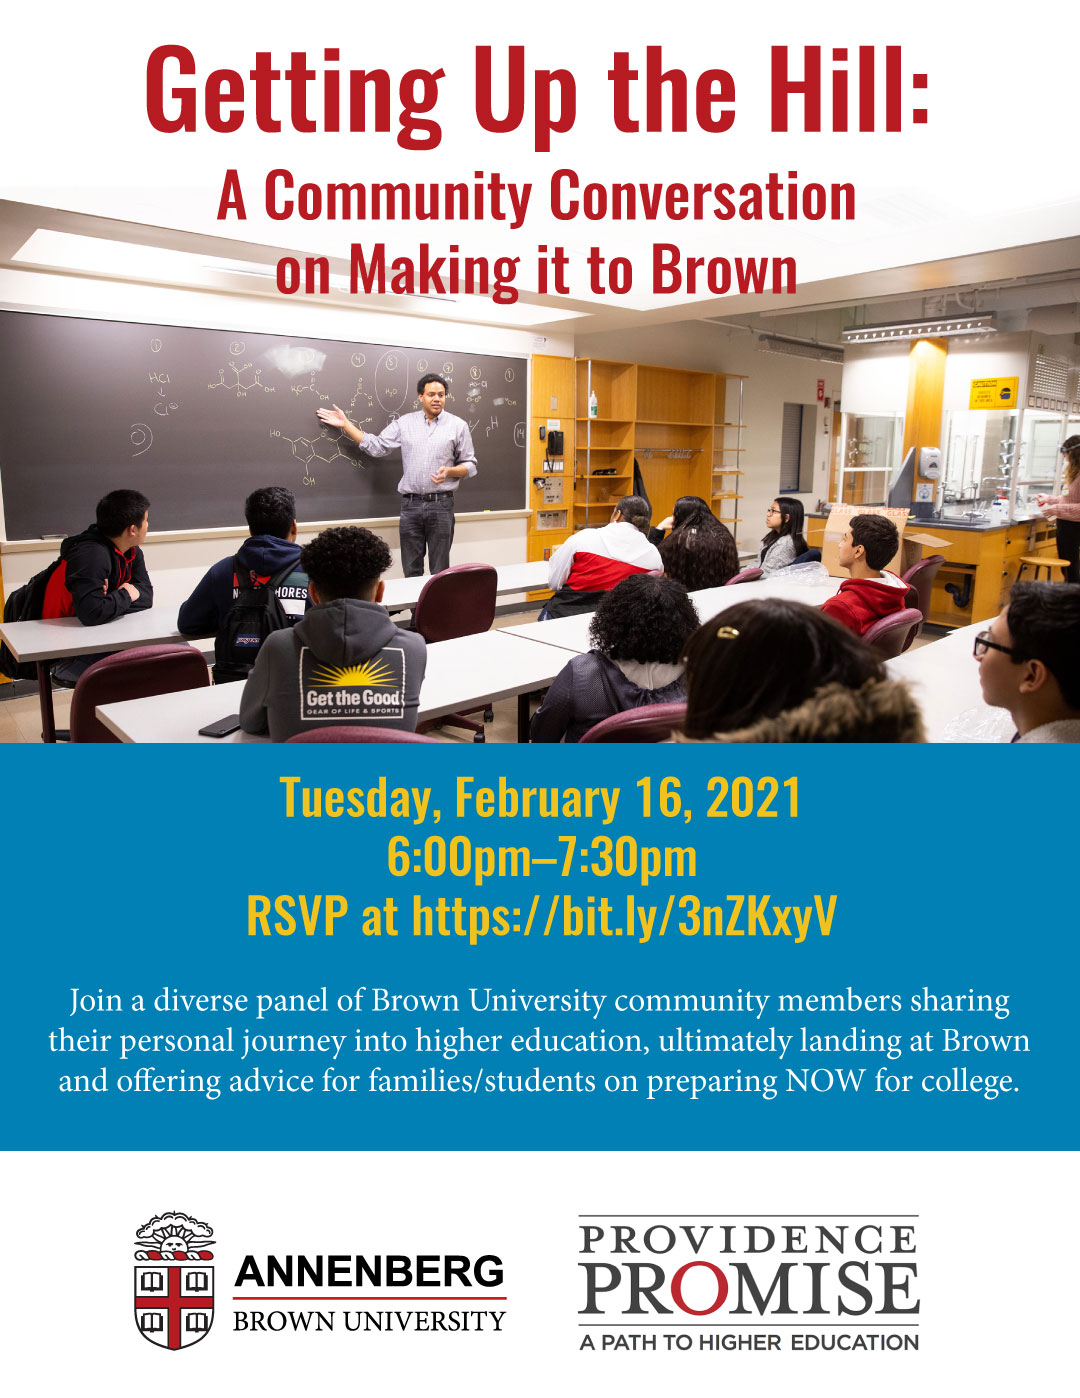 Getting up the Hill: A Community Conversation on Making it to Brown